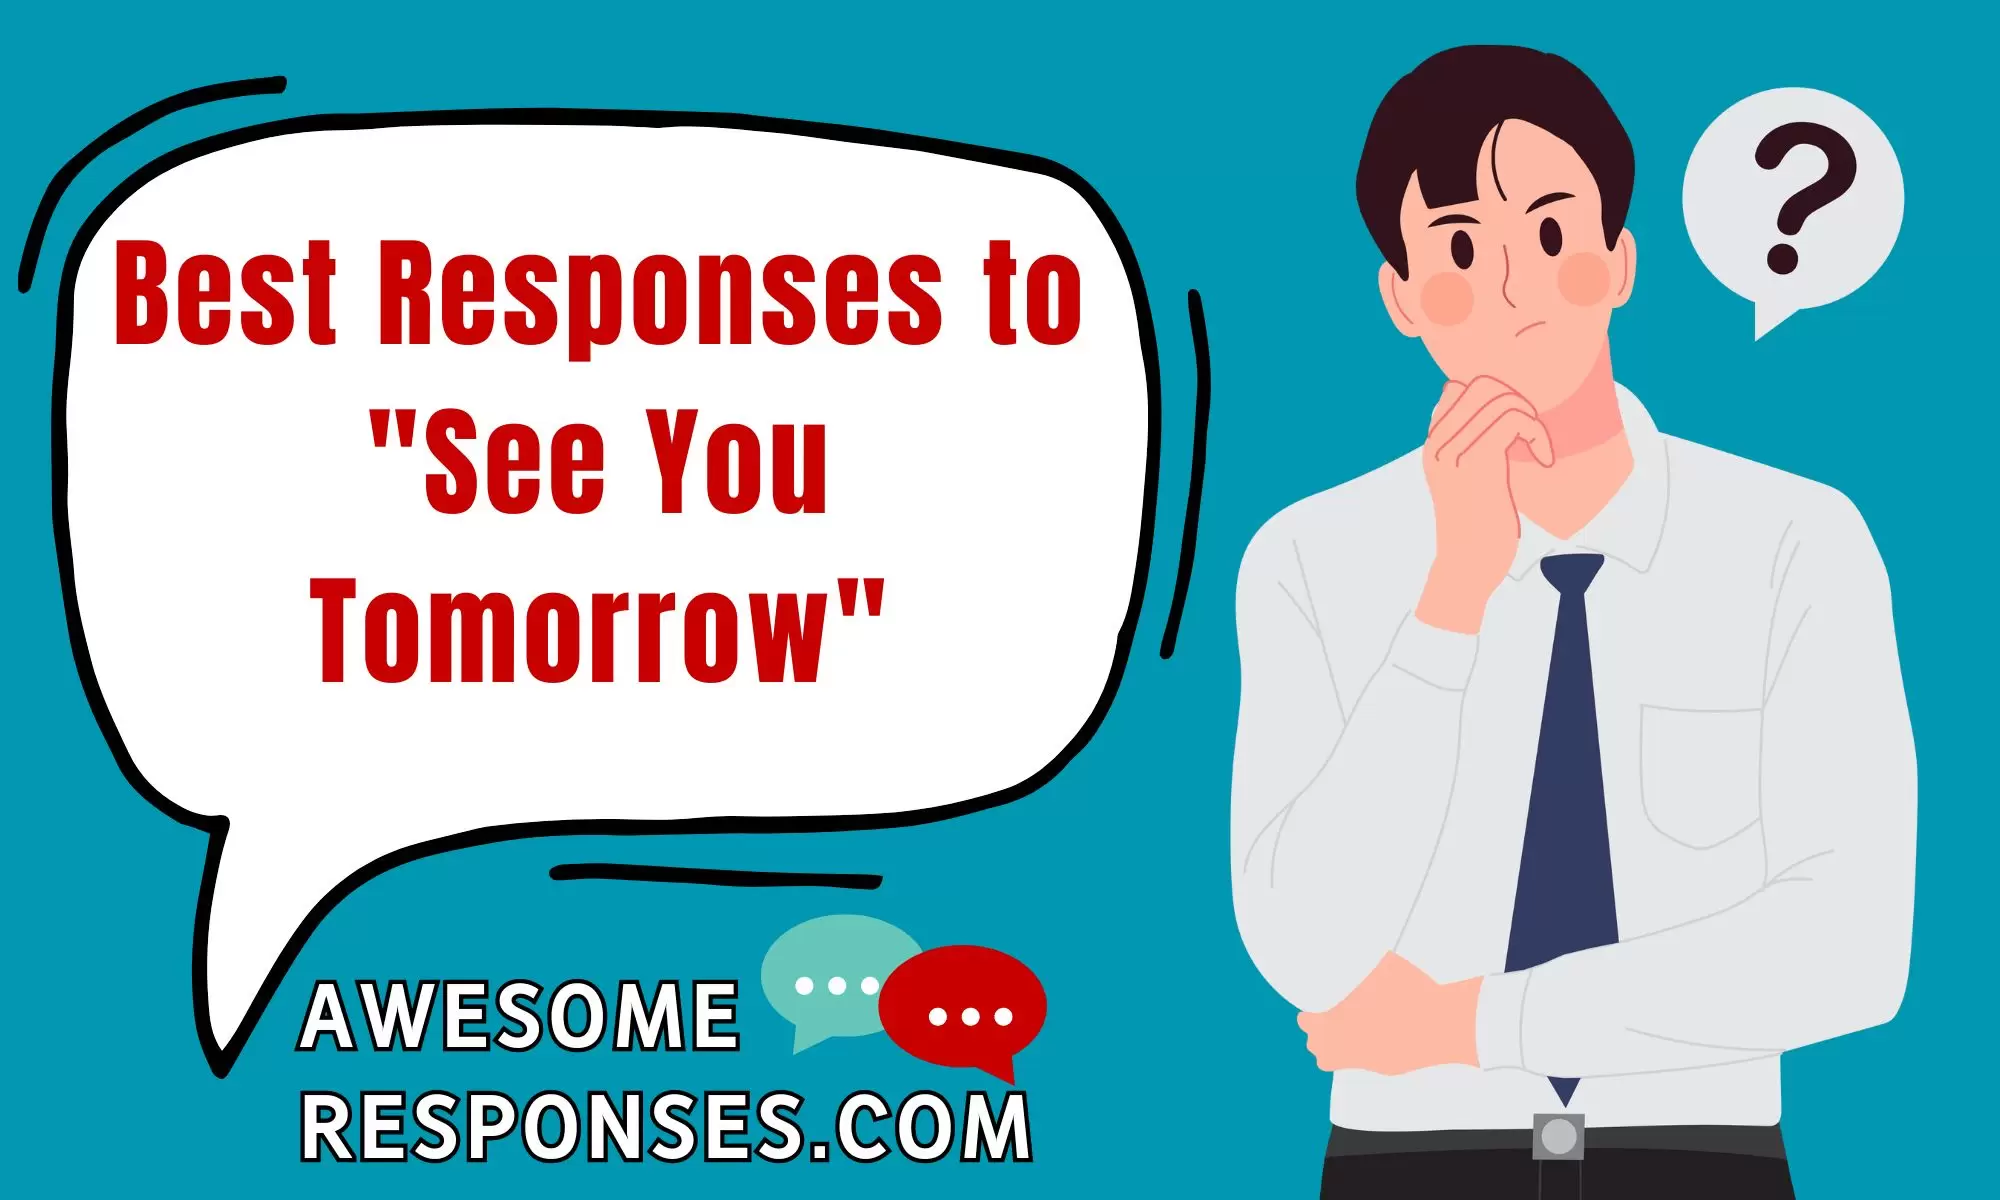 Best Responses to "See You Tomorrow"